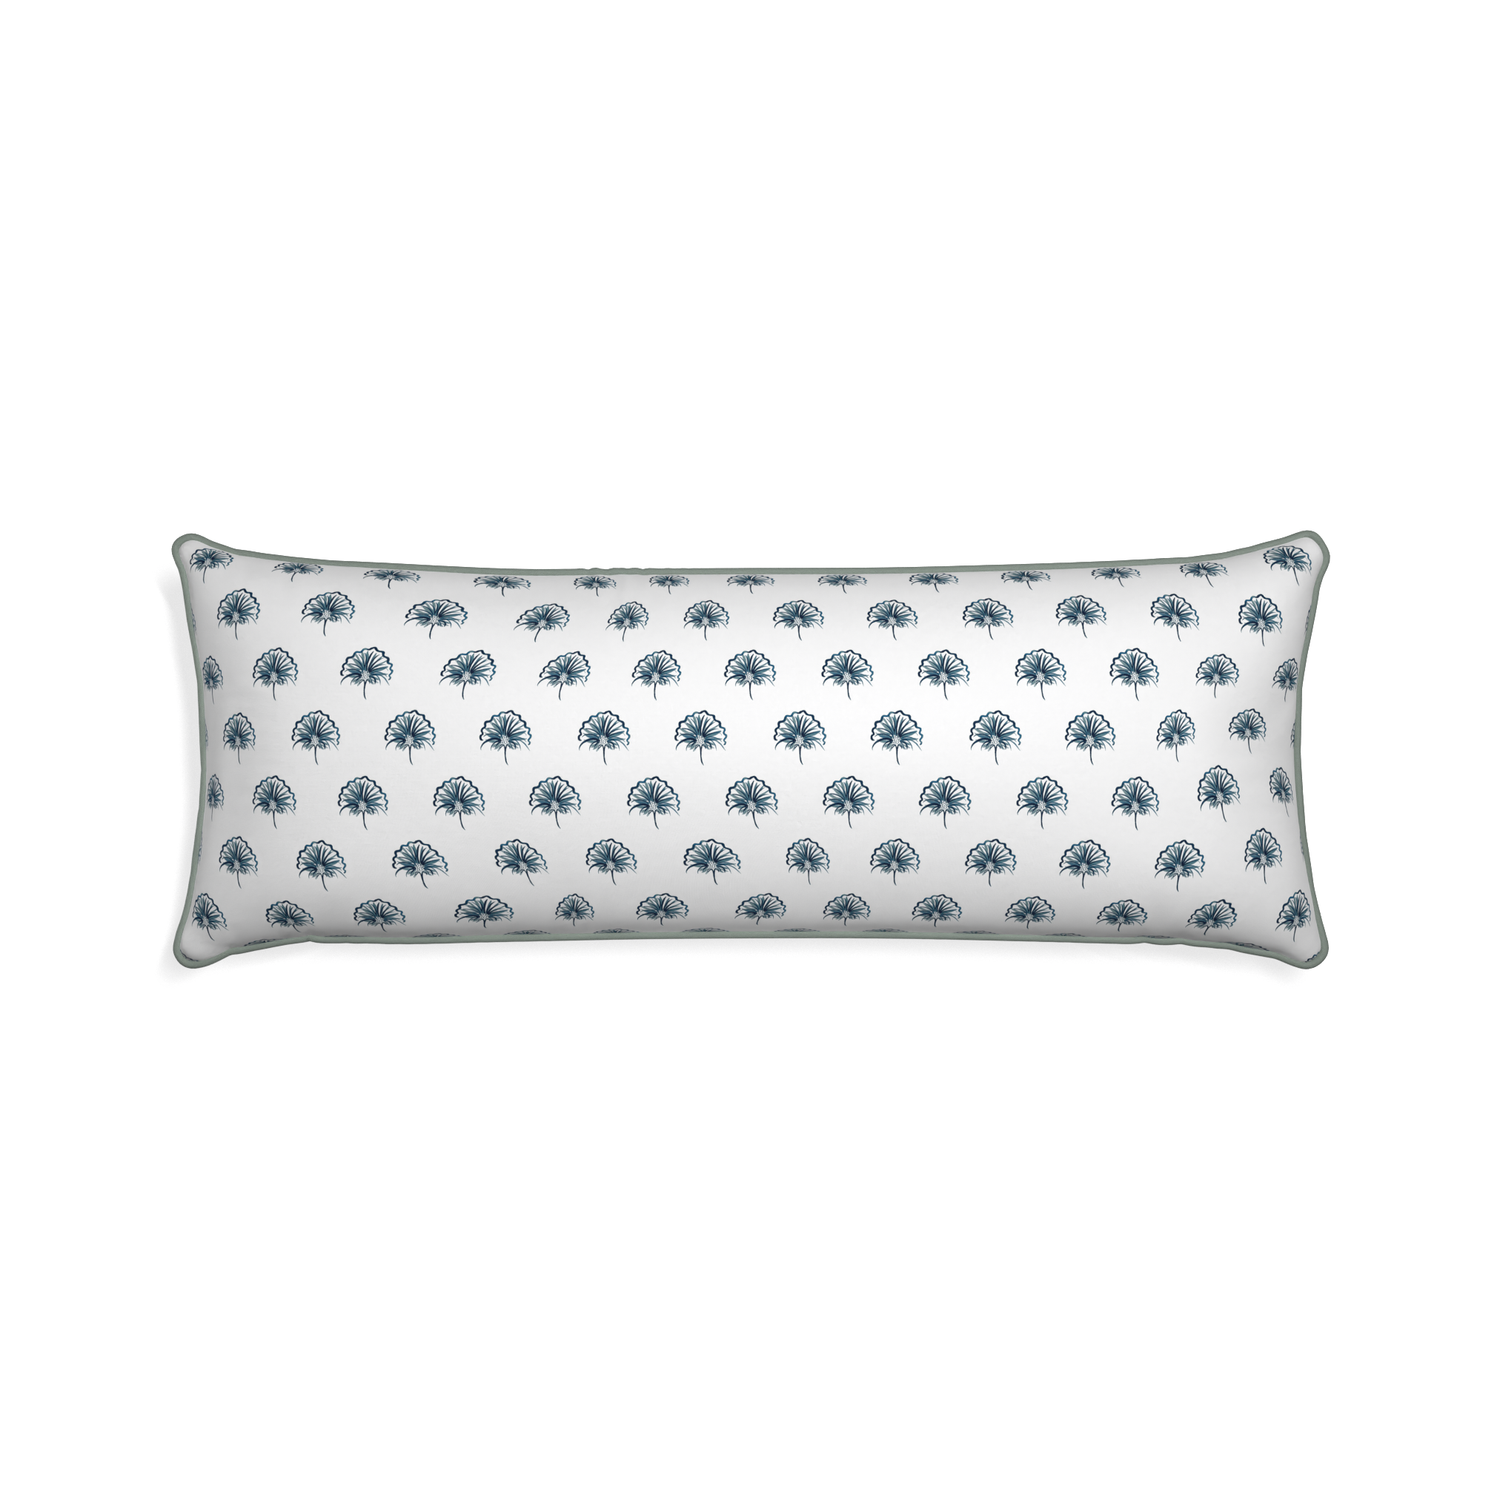 Xl-lumbar penelope midnight custom floral navypillow with sage piping on white background